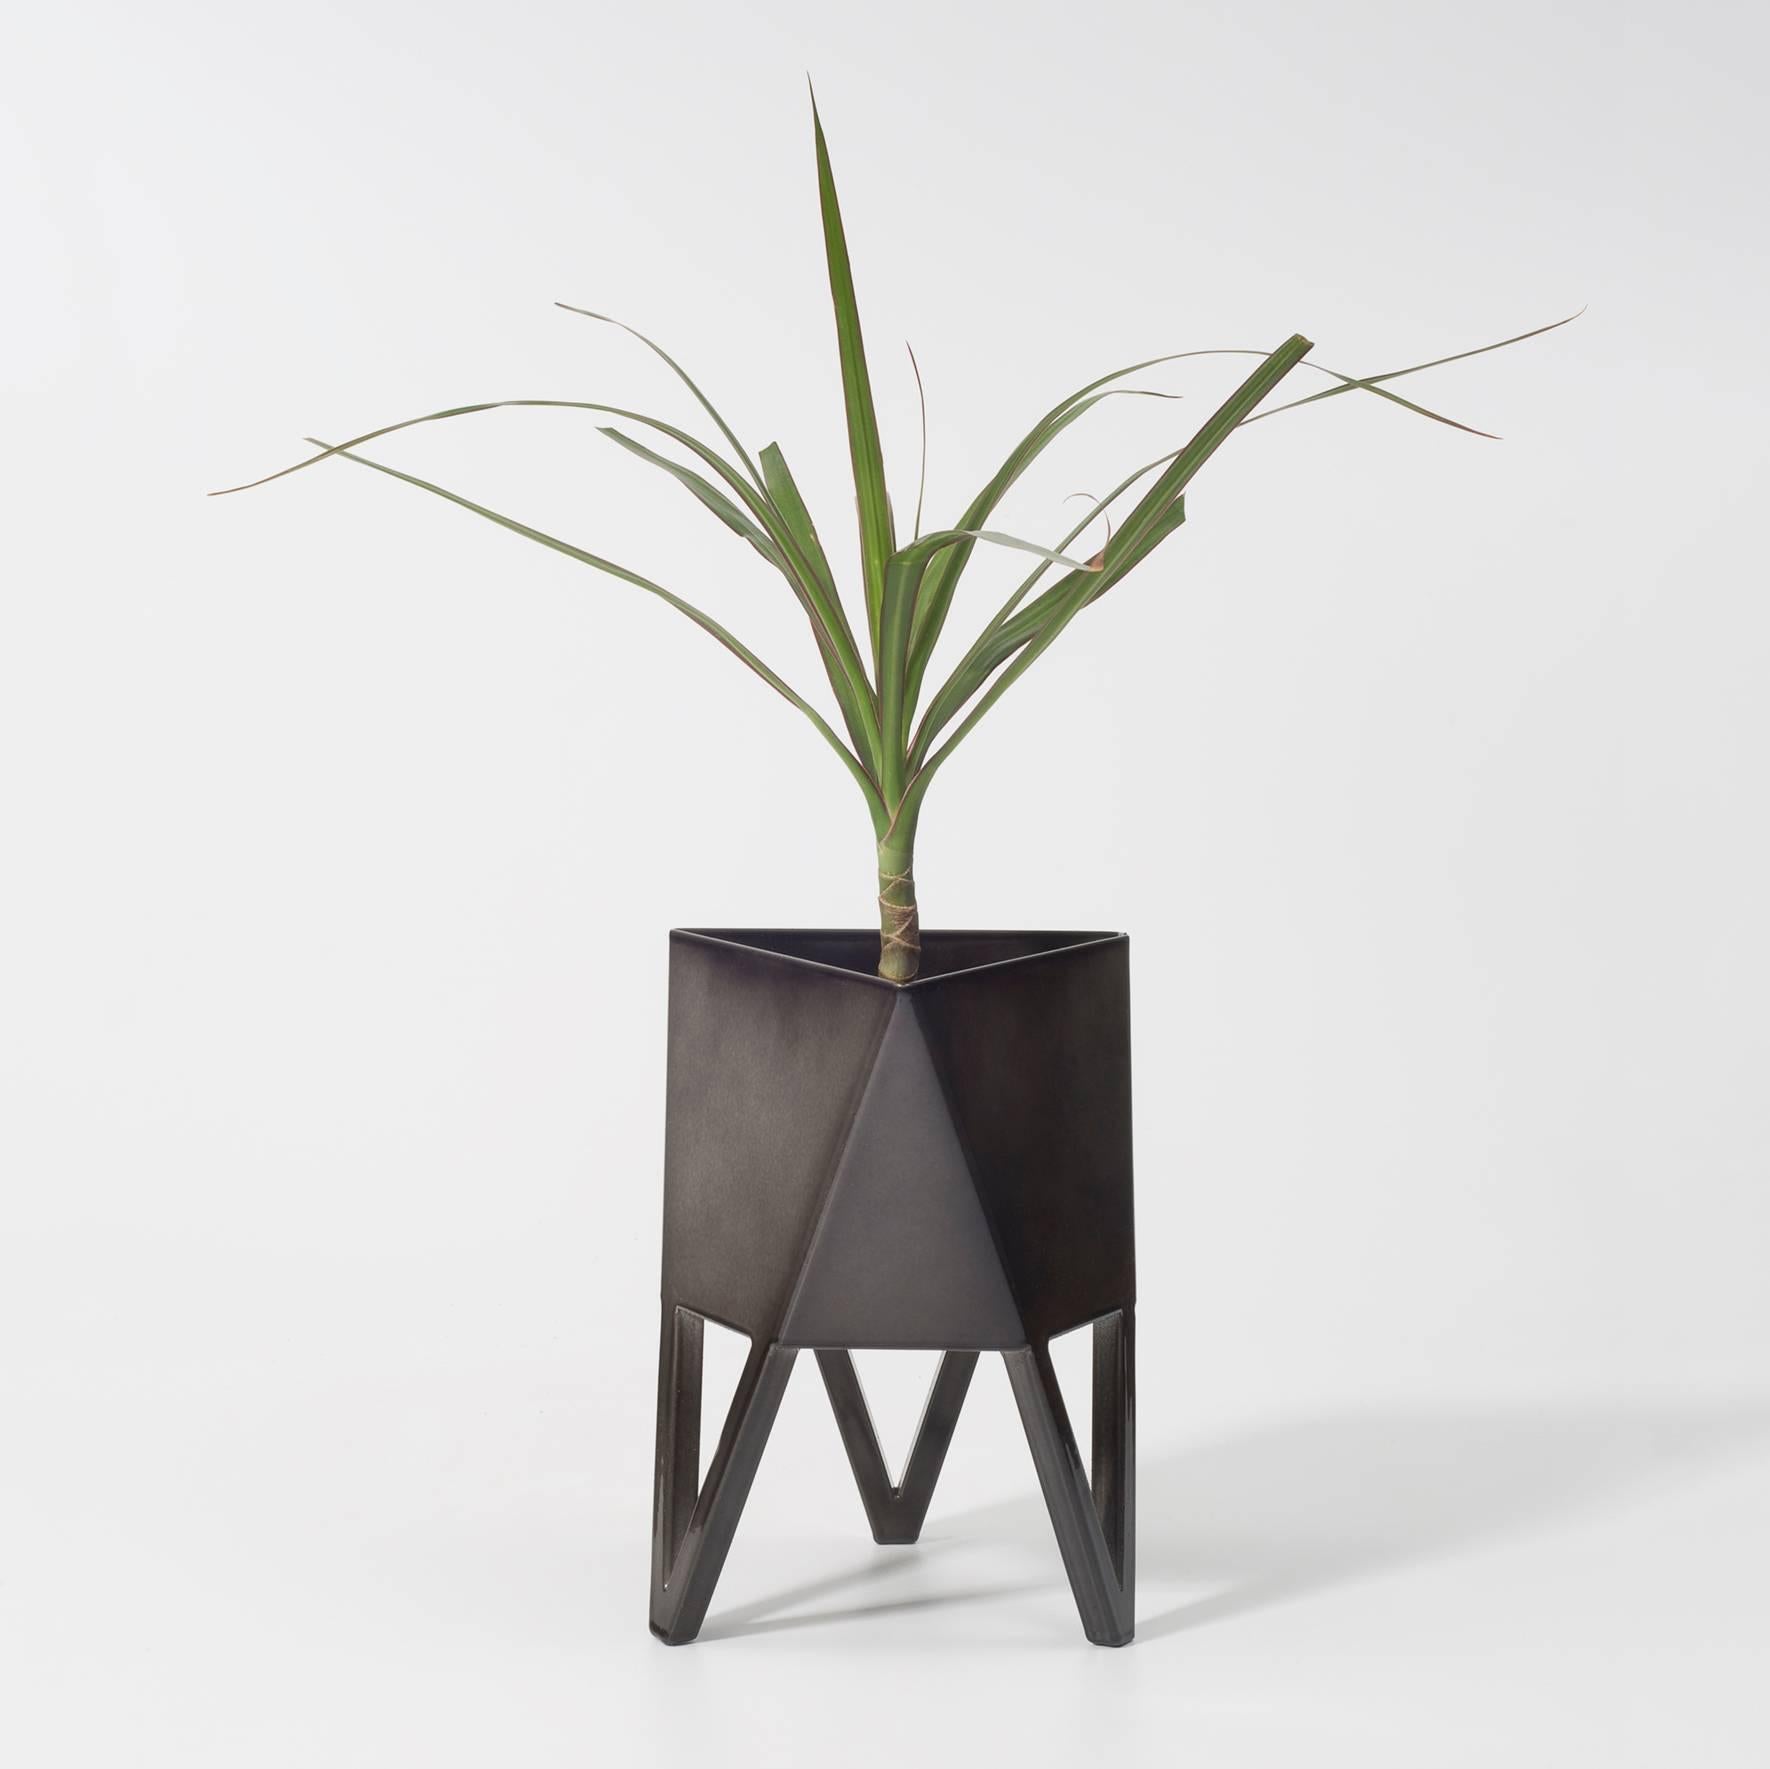 Deca Planter in Flat Black Steel, Small, by Force/Collide 5